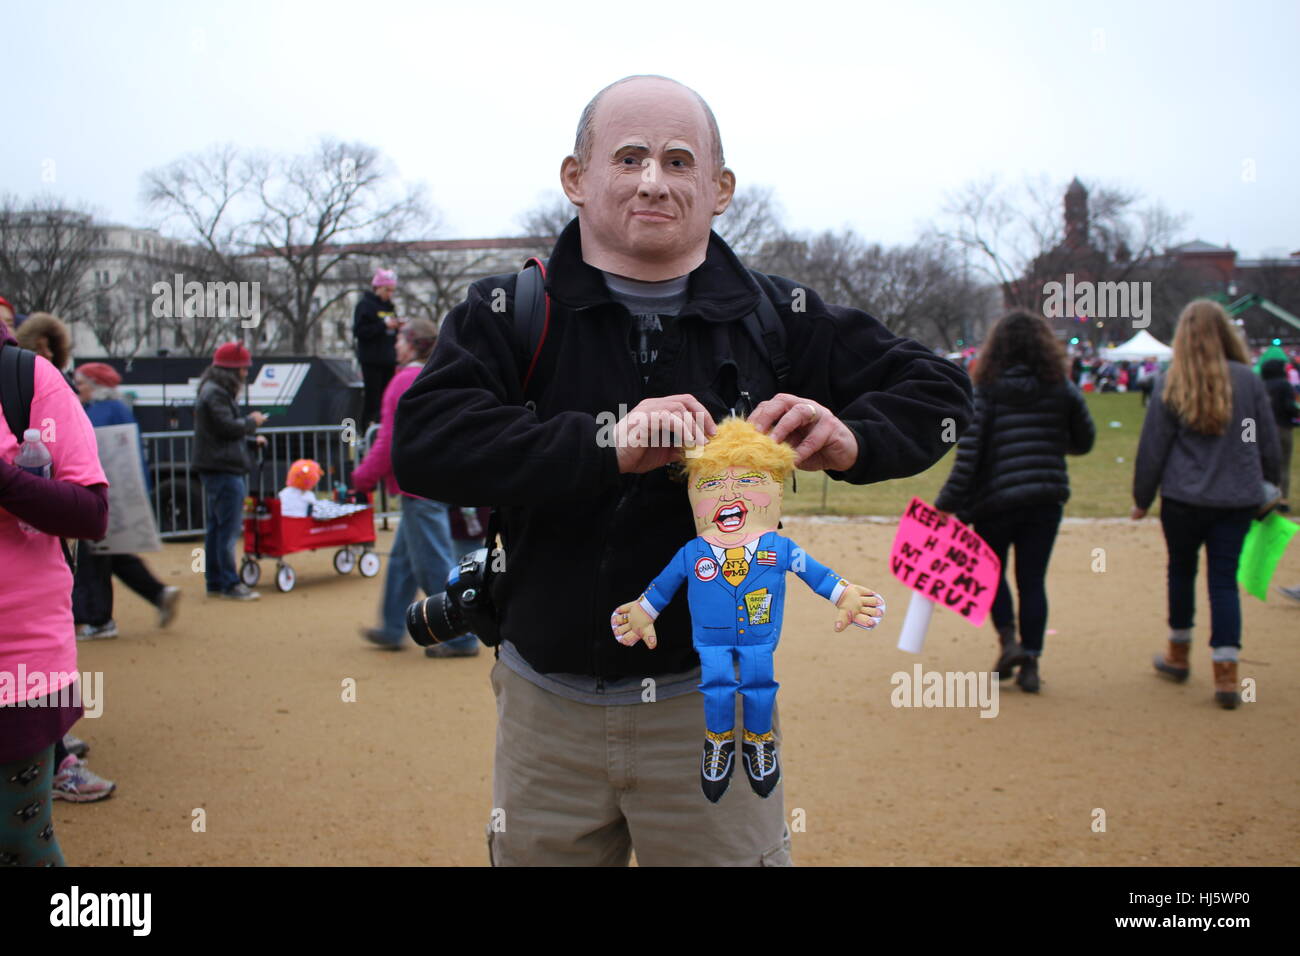 District of Columbia, USA. 21 Jan, 2017. A man wears a mask of Russian President Vladimir Putin and holds a doll of President Donald Trump. Stock Photo